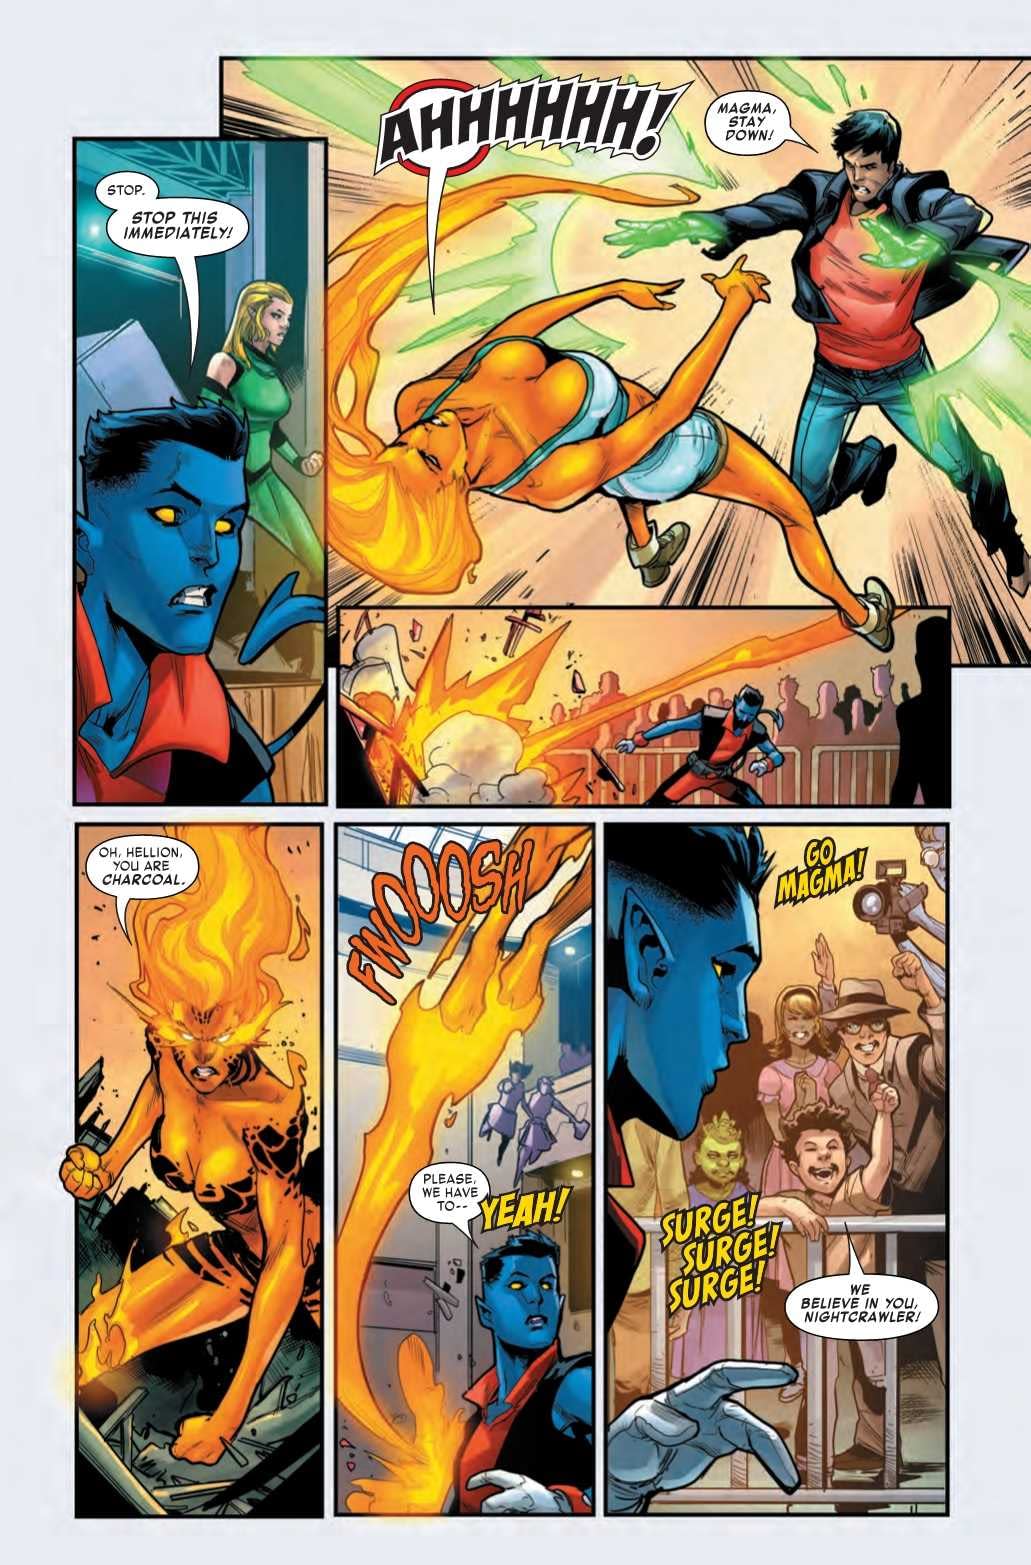 Age of X-Man Goes Full WWE in Amazing Nightcrawler #4 (Preview)